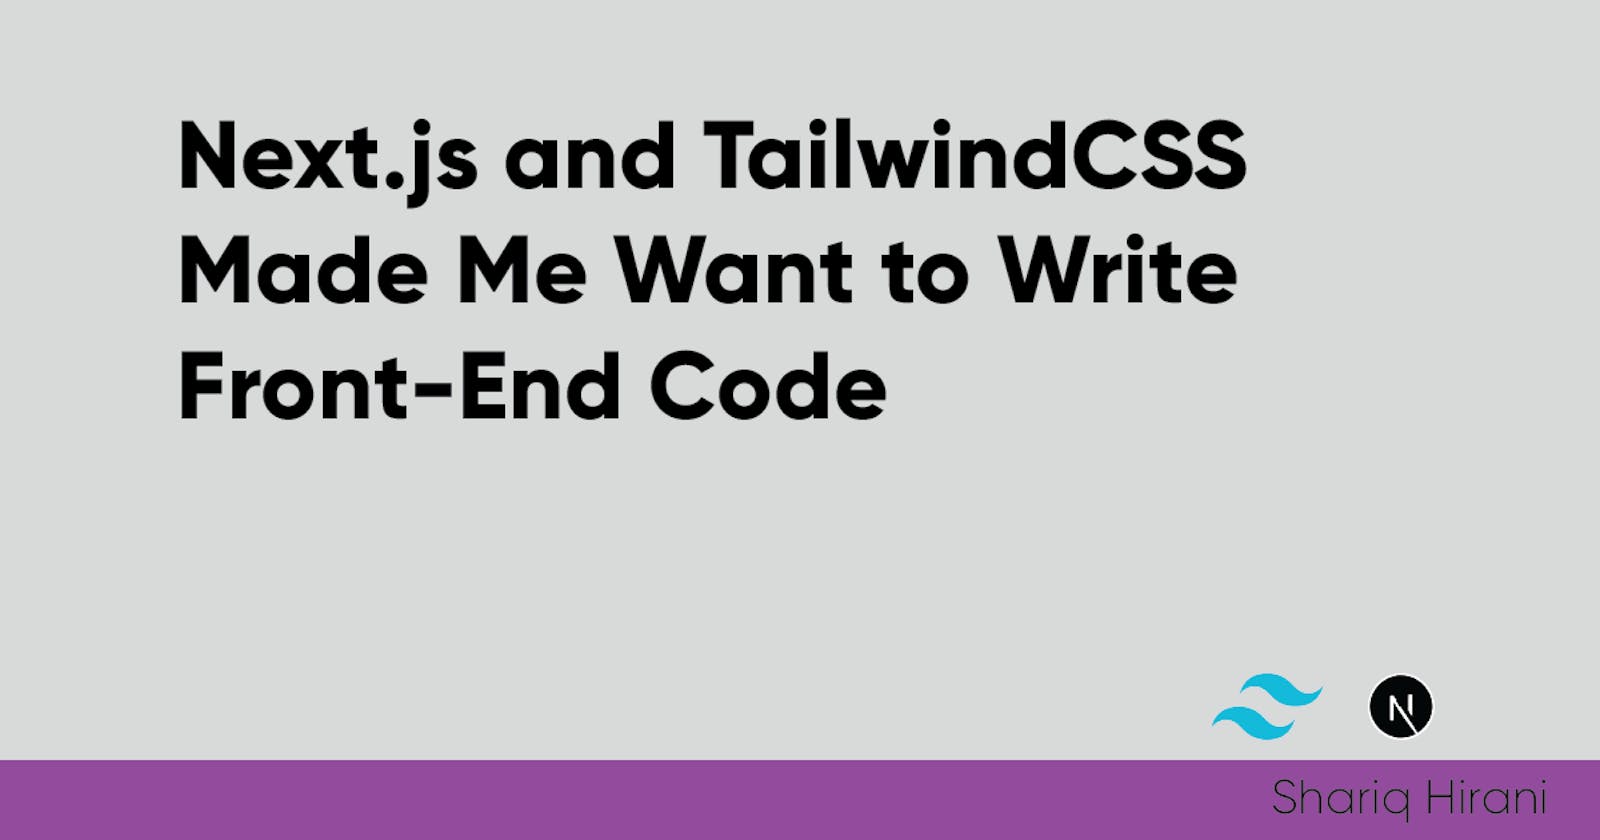 Next.js and TailwindCSS Made Me Want to Write Front-End Code